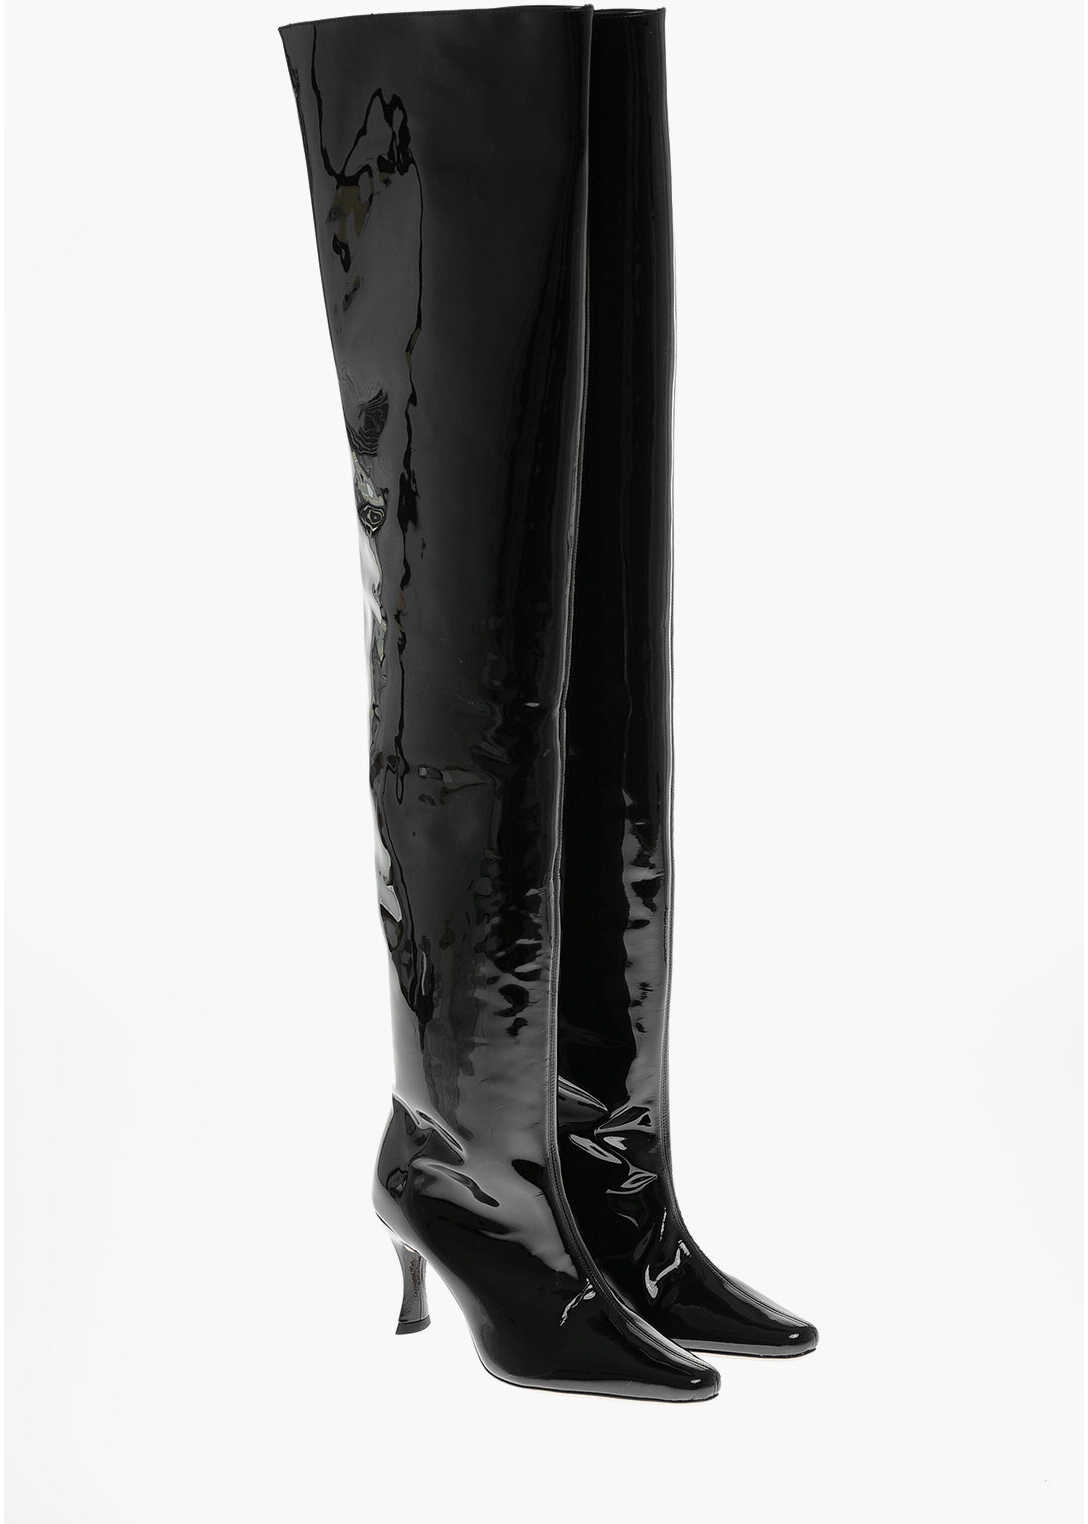 BY FAR Over The Knee Stevie Patent Leather Boots 8Cm Black